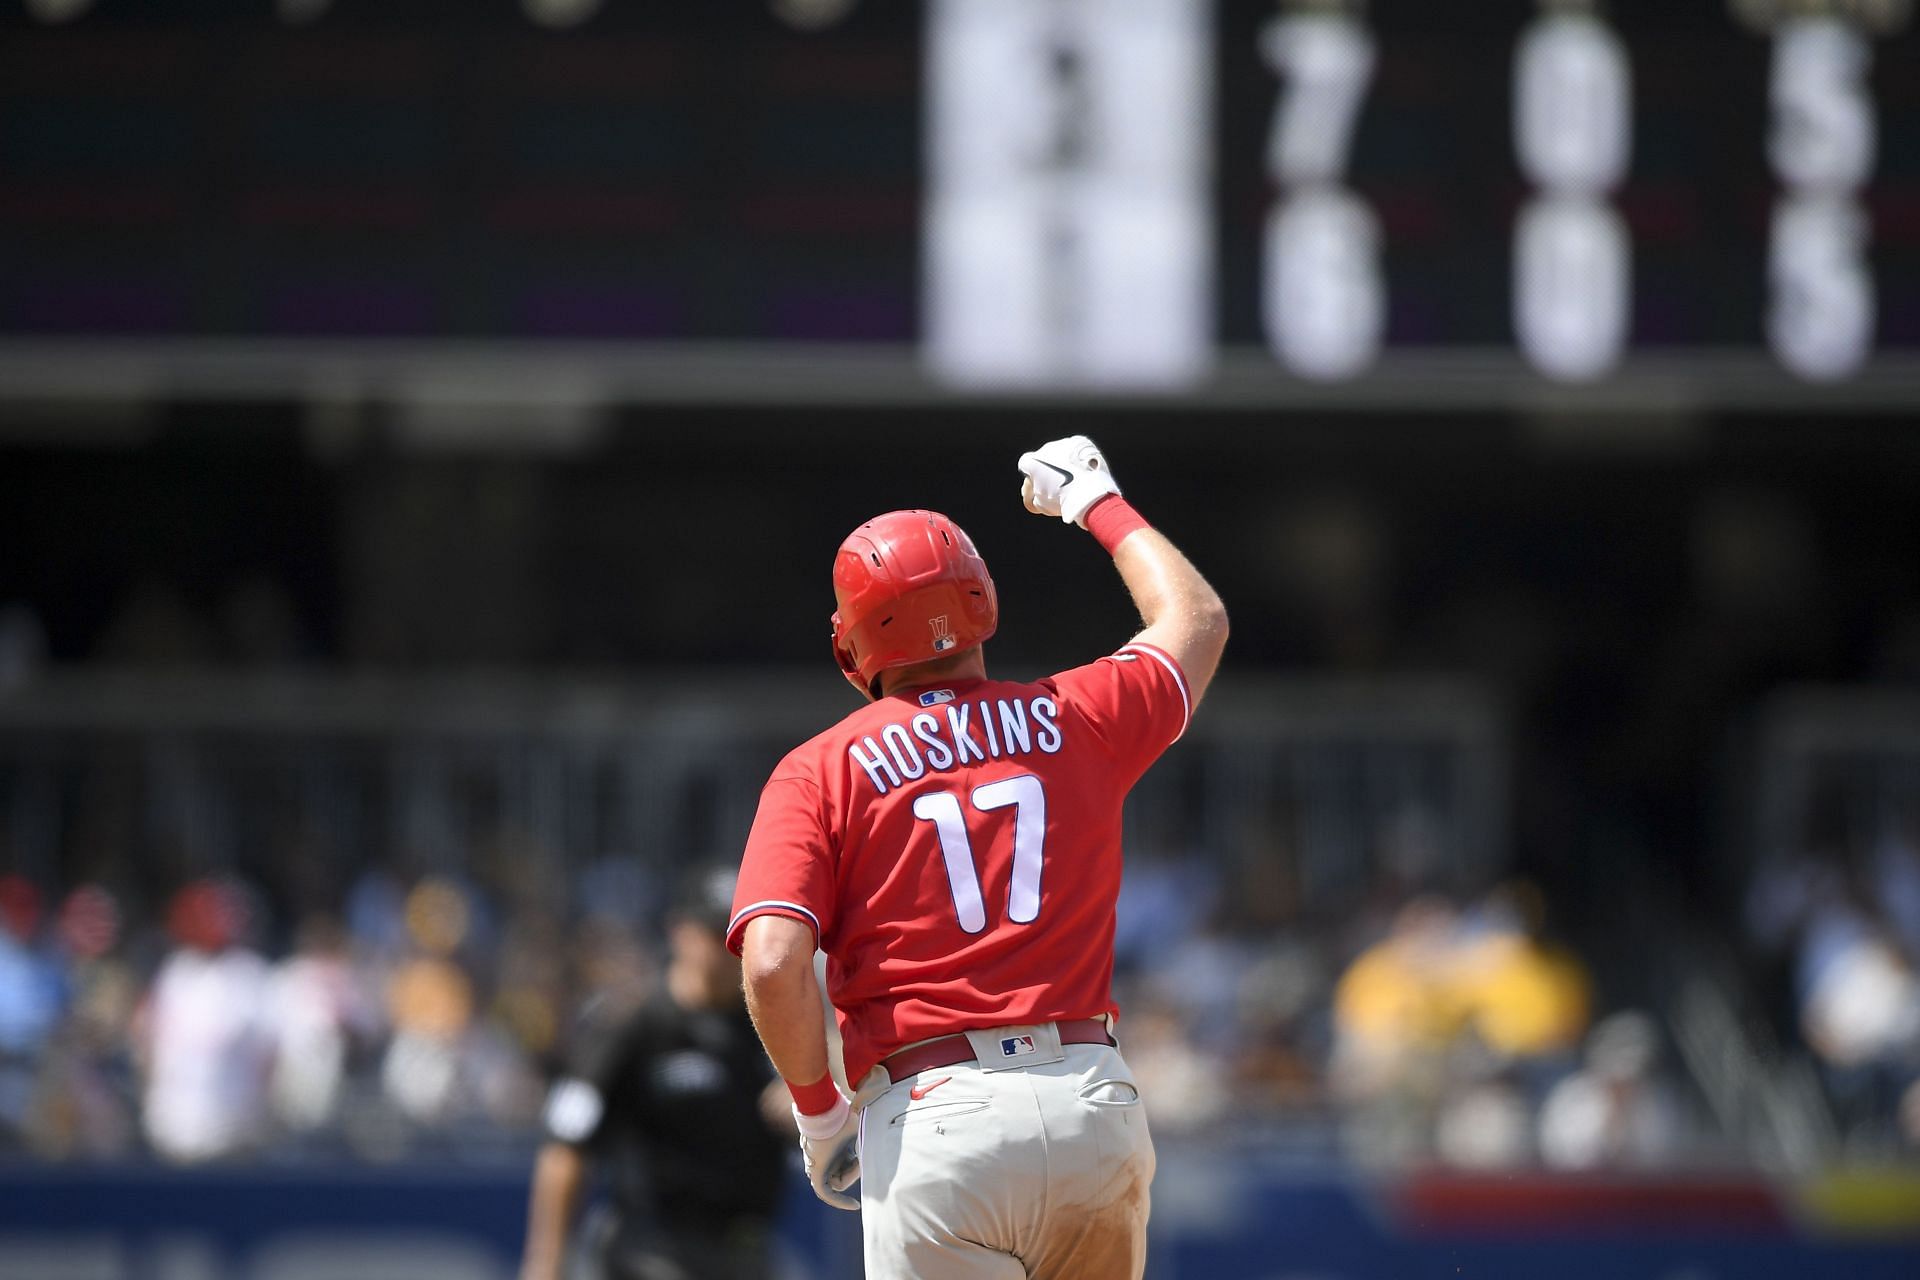 Rhys Hoskins is unfazed about the big contracts of his teammates